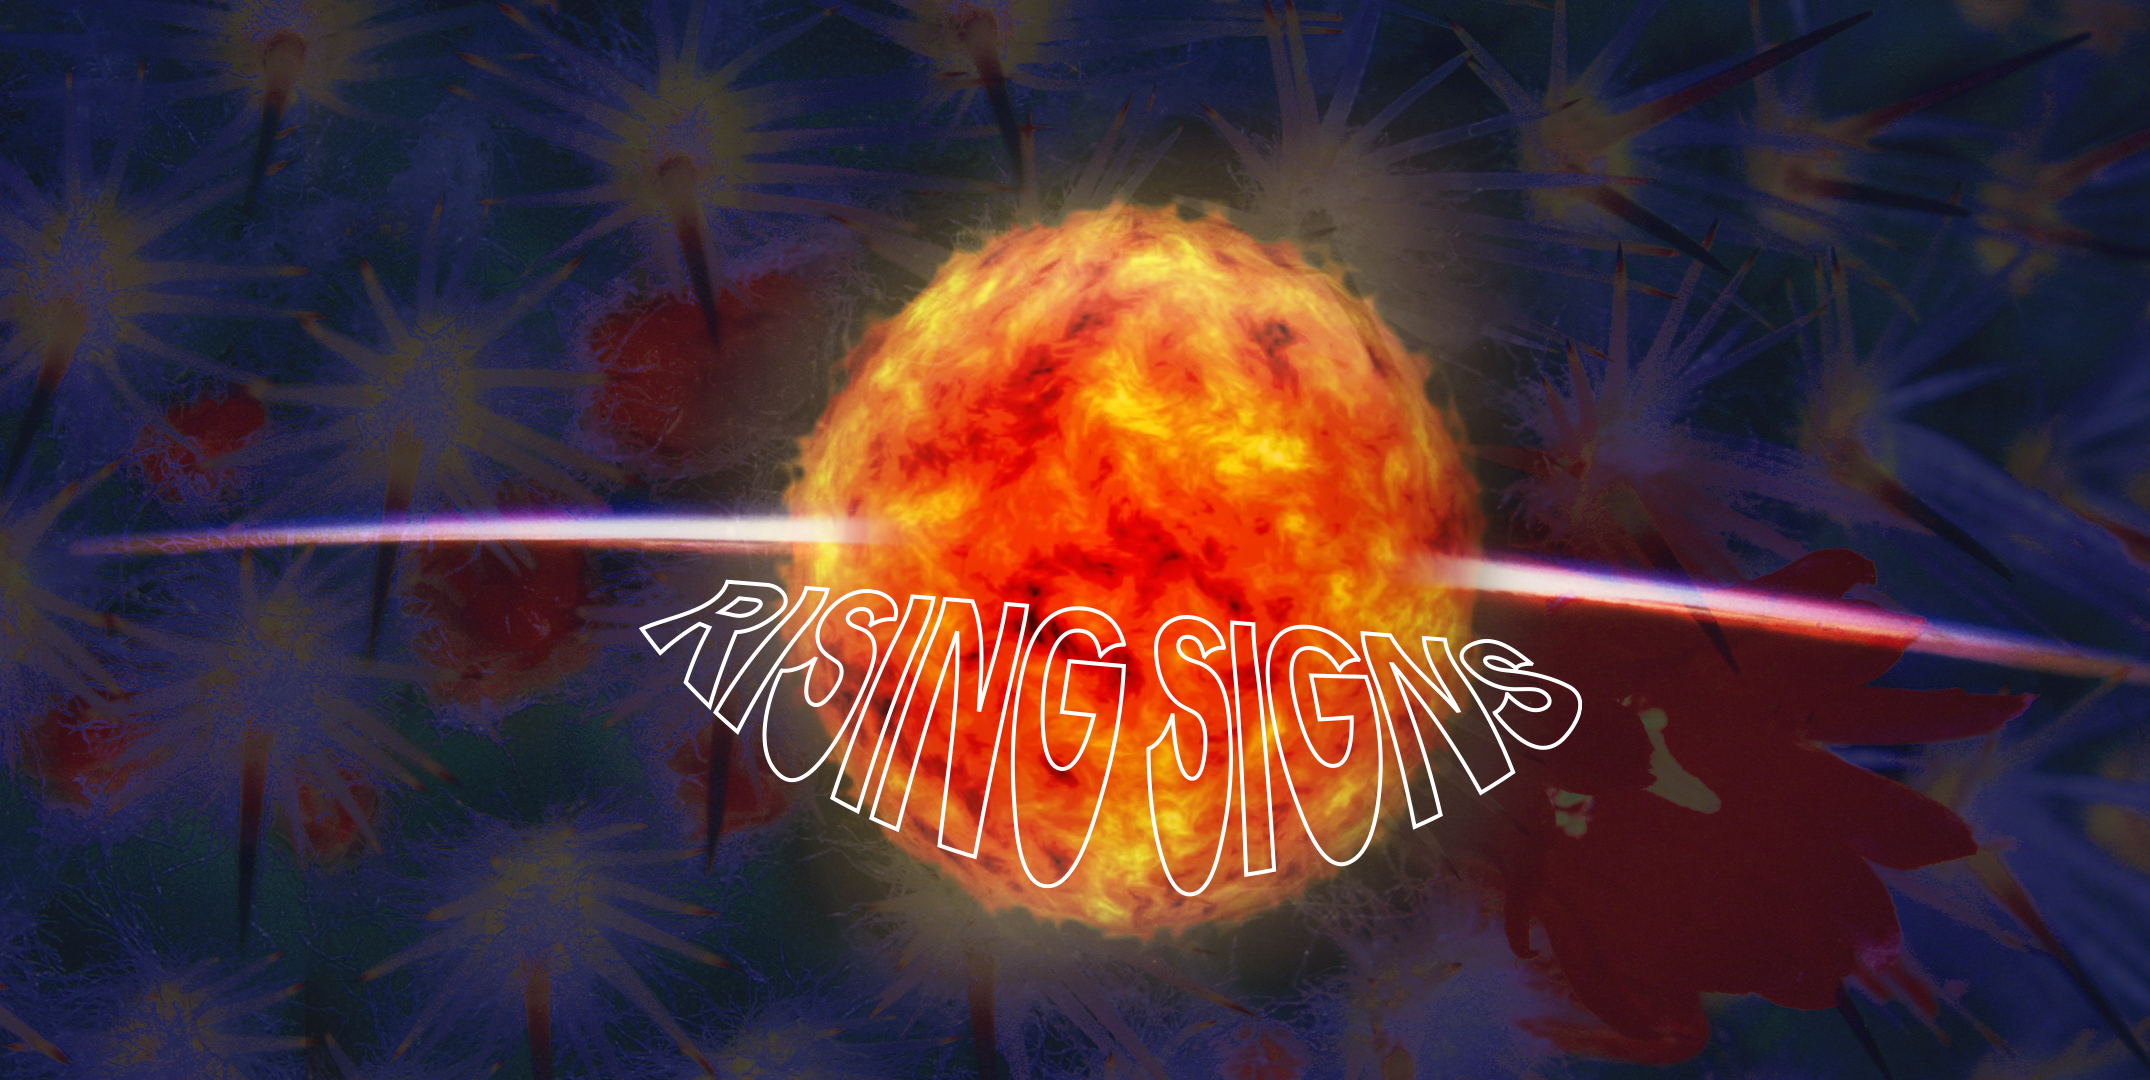 What Your Rising Sign Means and How to Find It